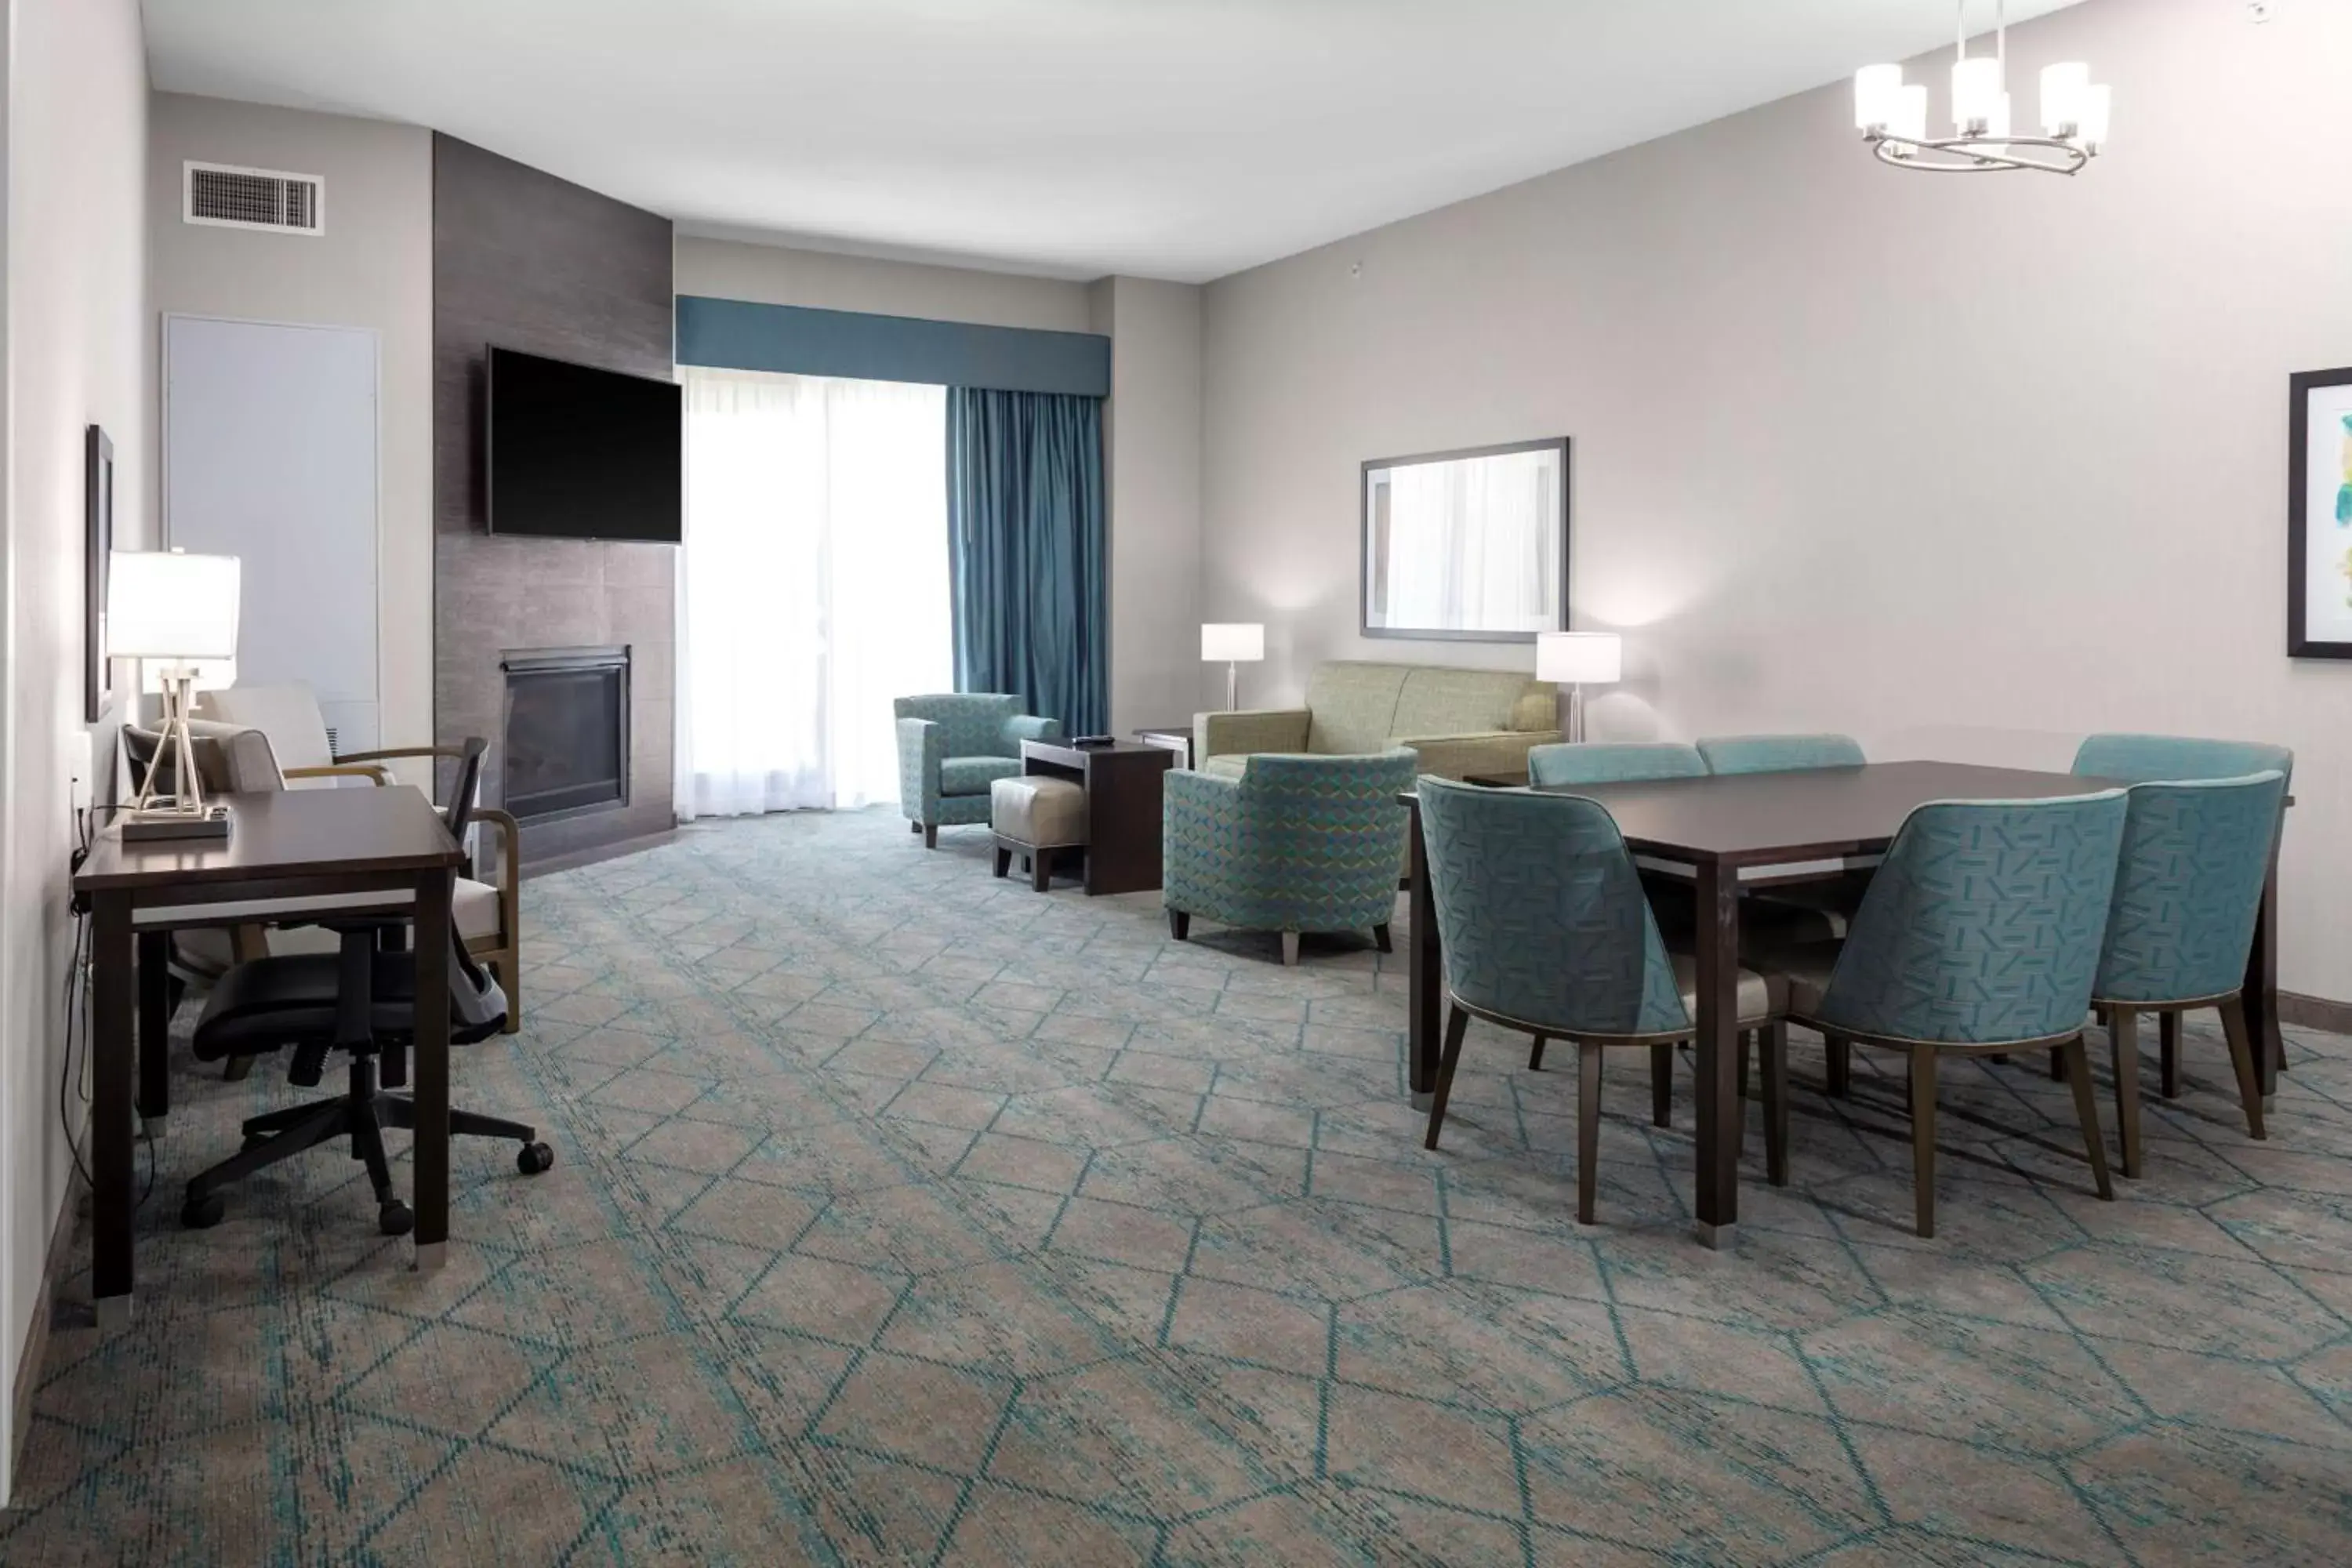 Bedroom, Dining Area in Homewood Suites by Hilton Phoenix Airport South